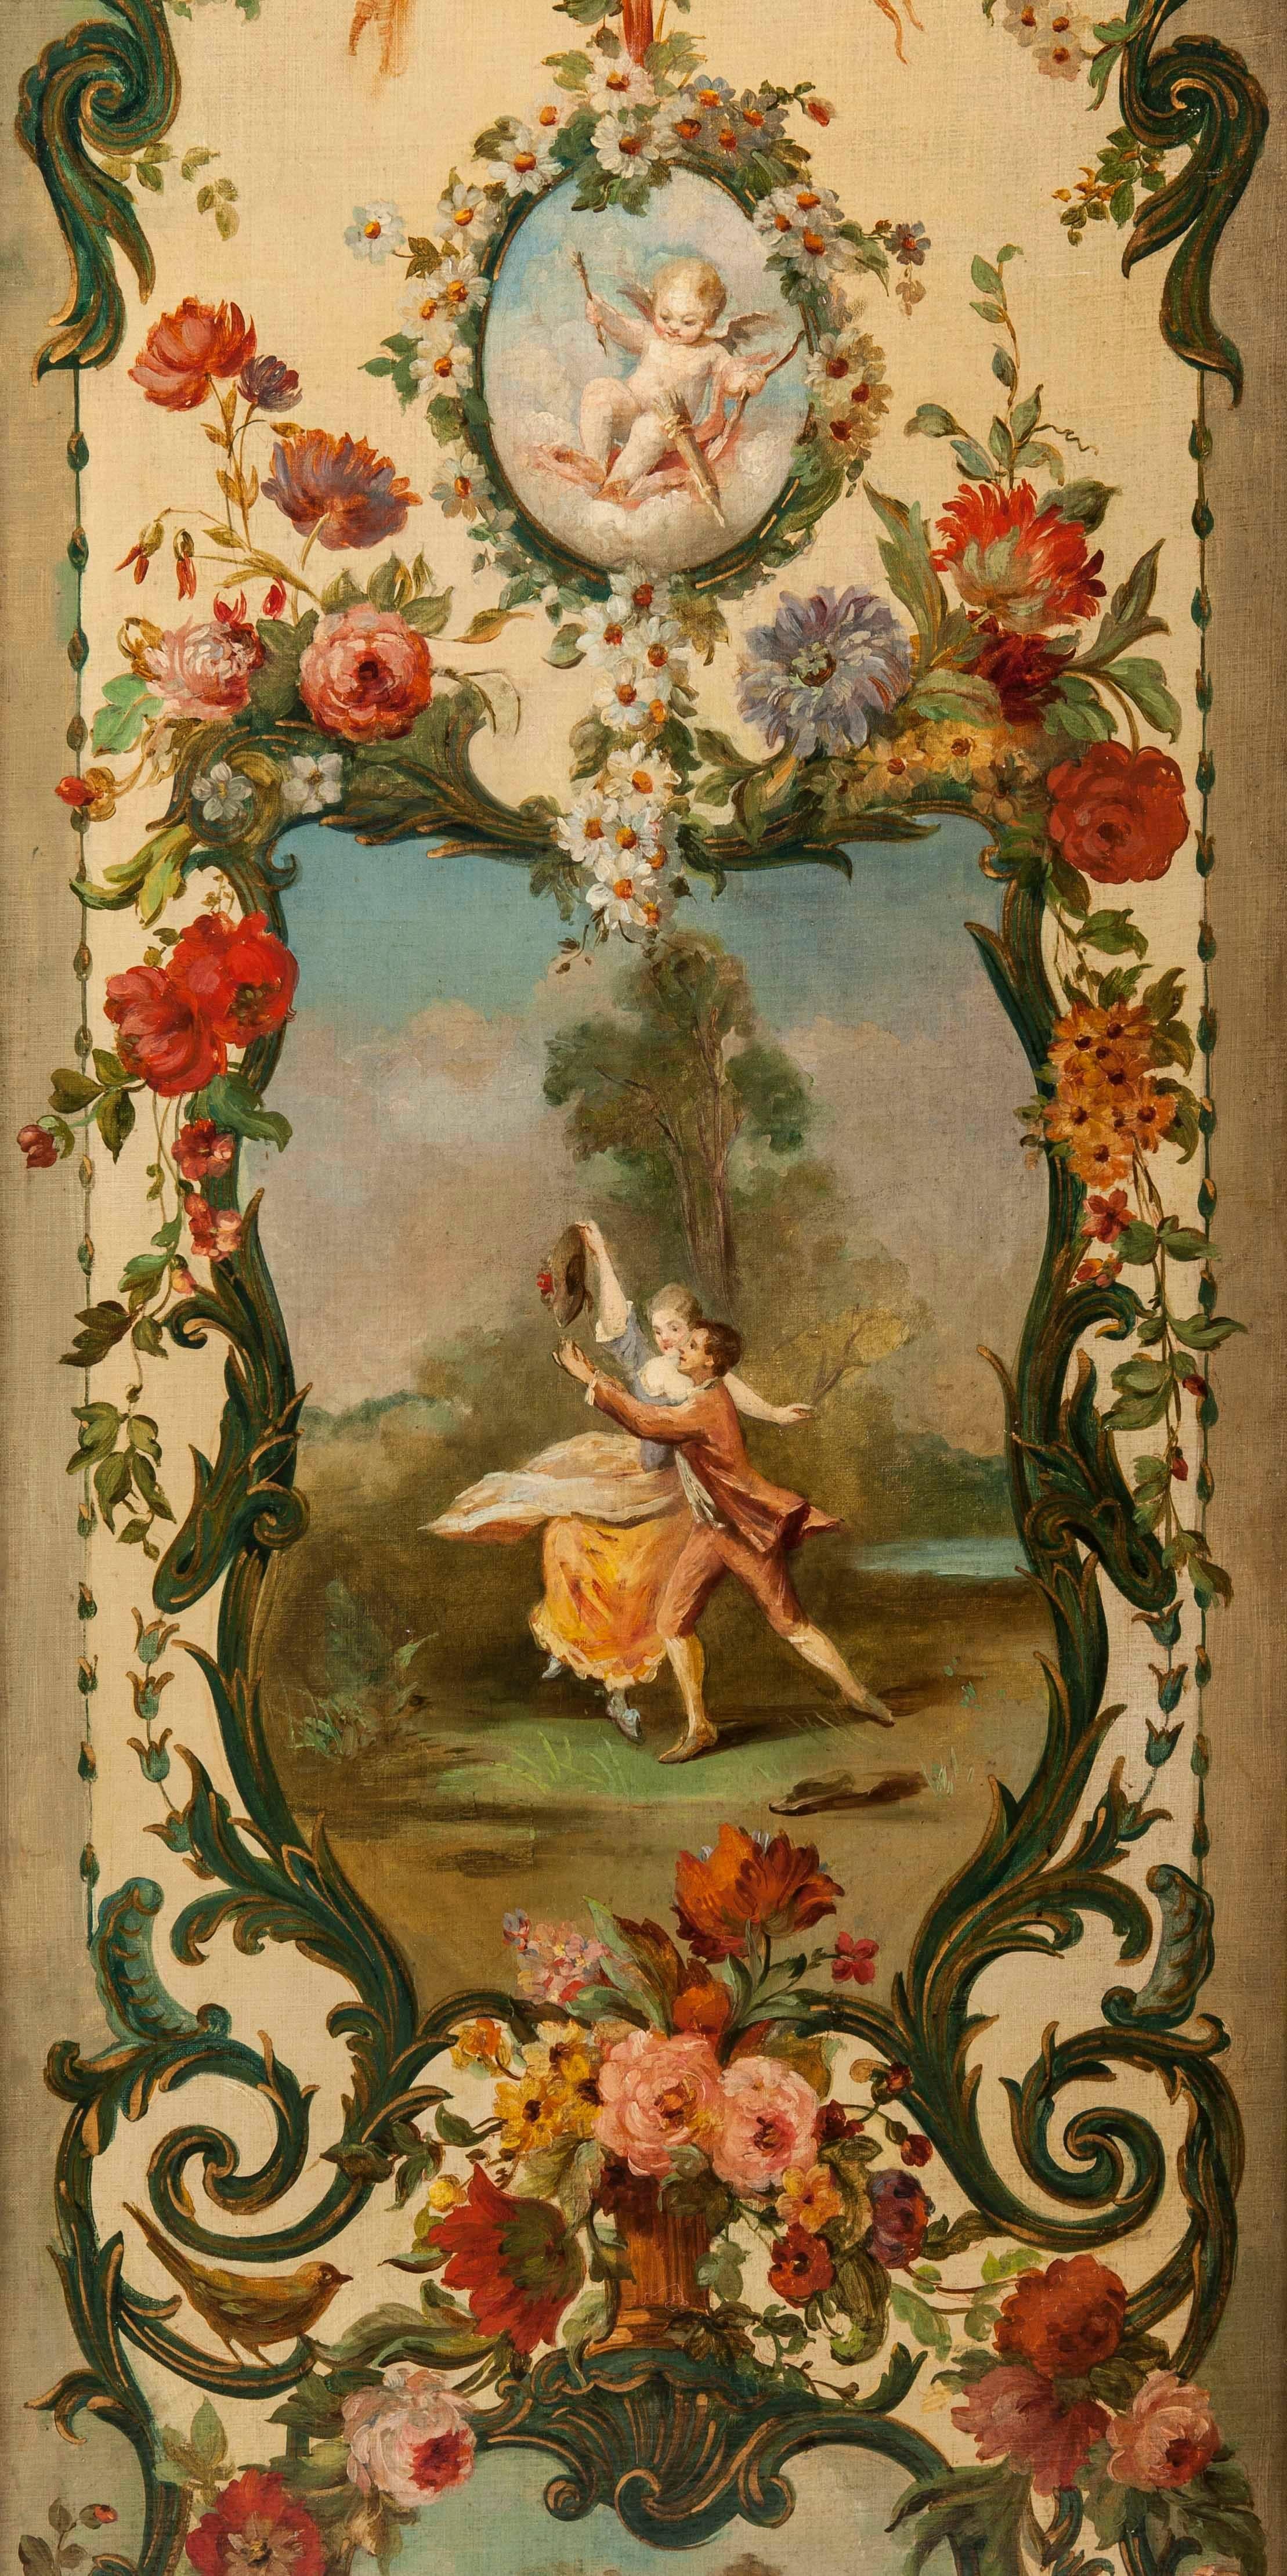 A five fold screen in the early romantic manner.

The gold gilt wood frames, channelled, with a bound cannellure design, have arched tops and enclose the five hand-painted oil on canvas scenes of a series of bucolic ‘fete galante’ scenes in the